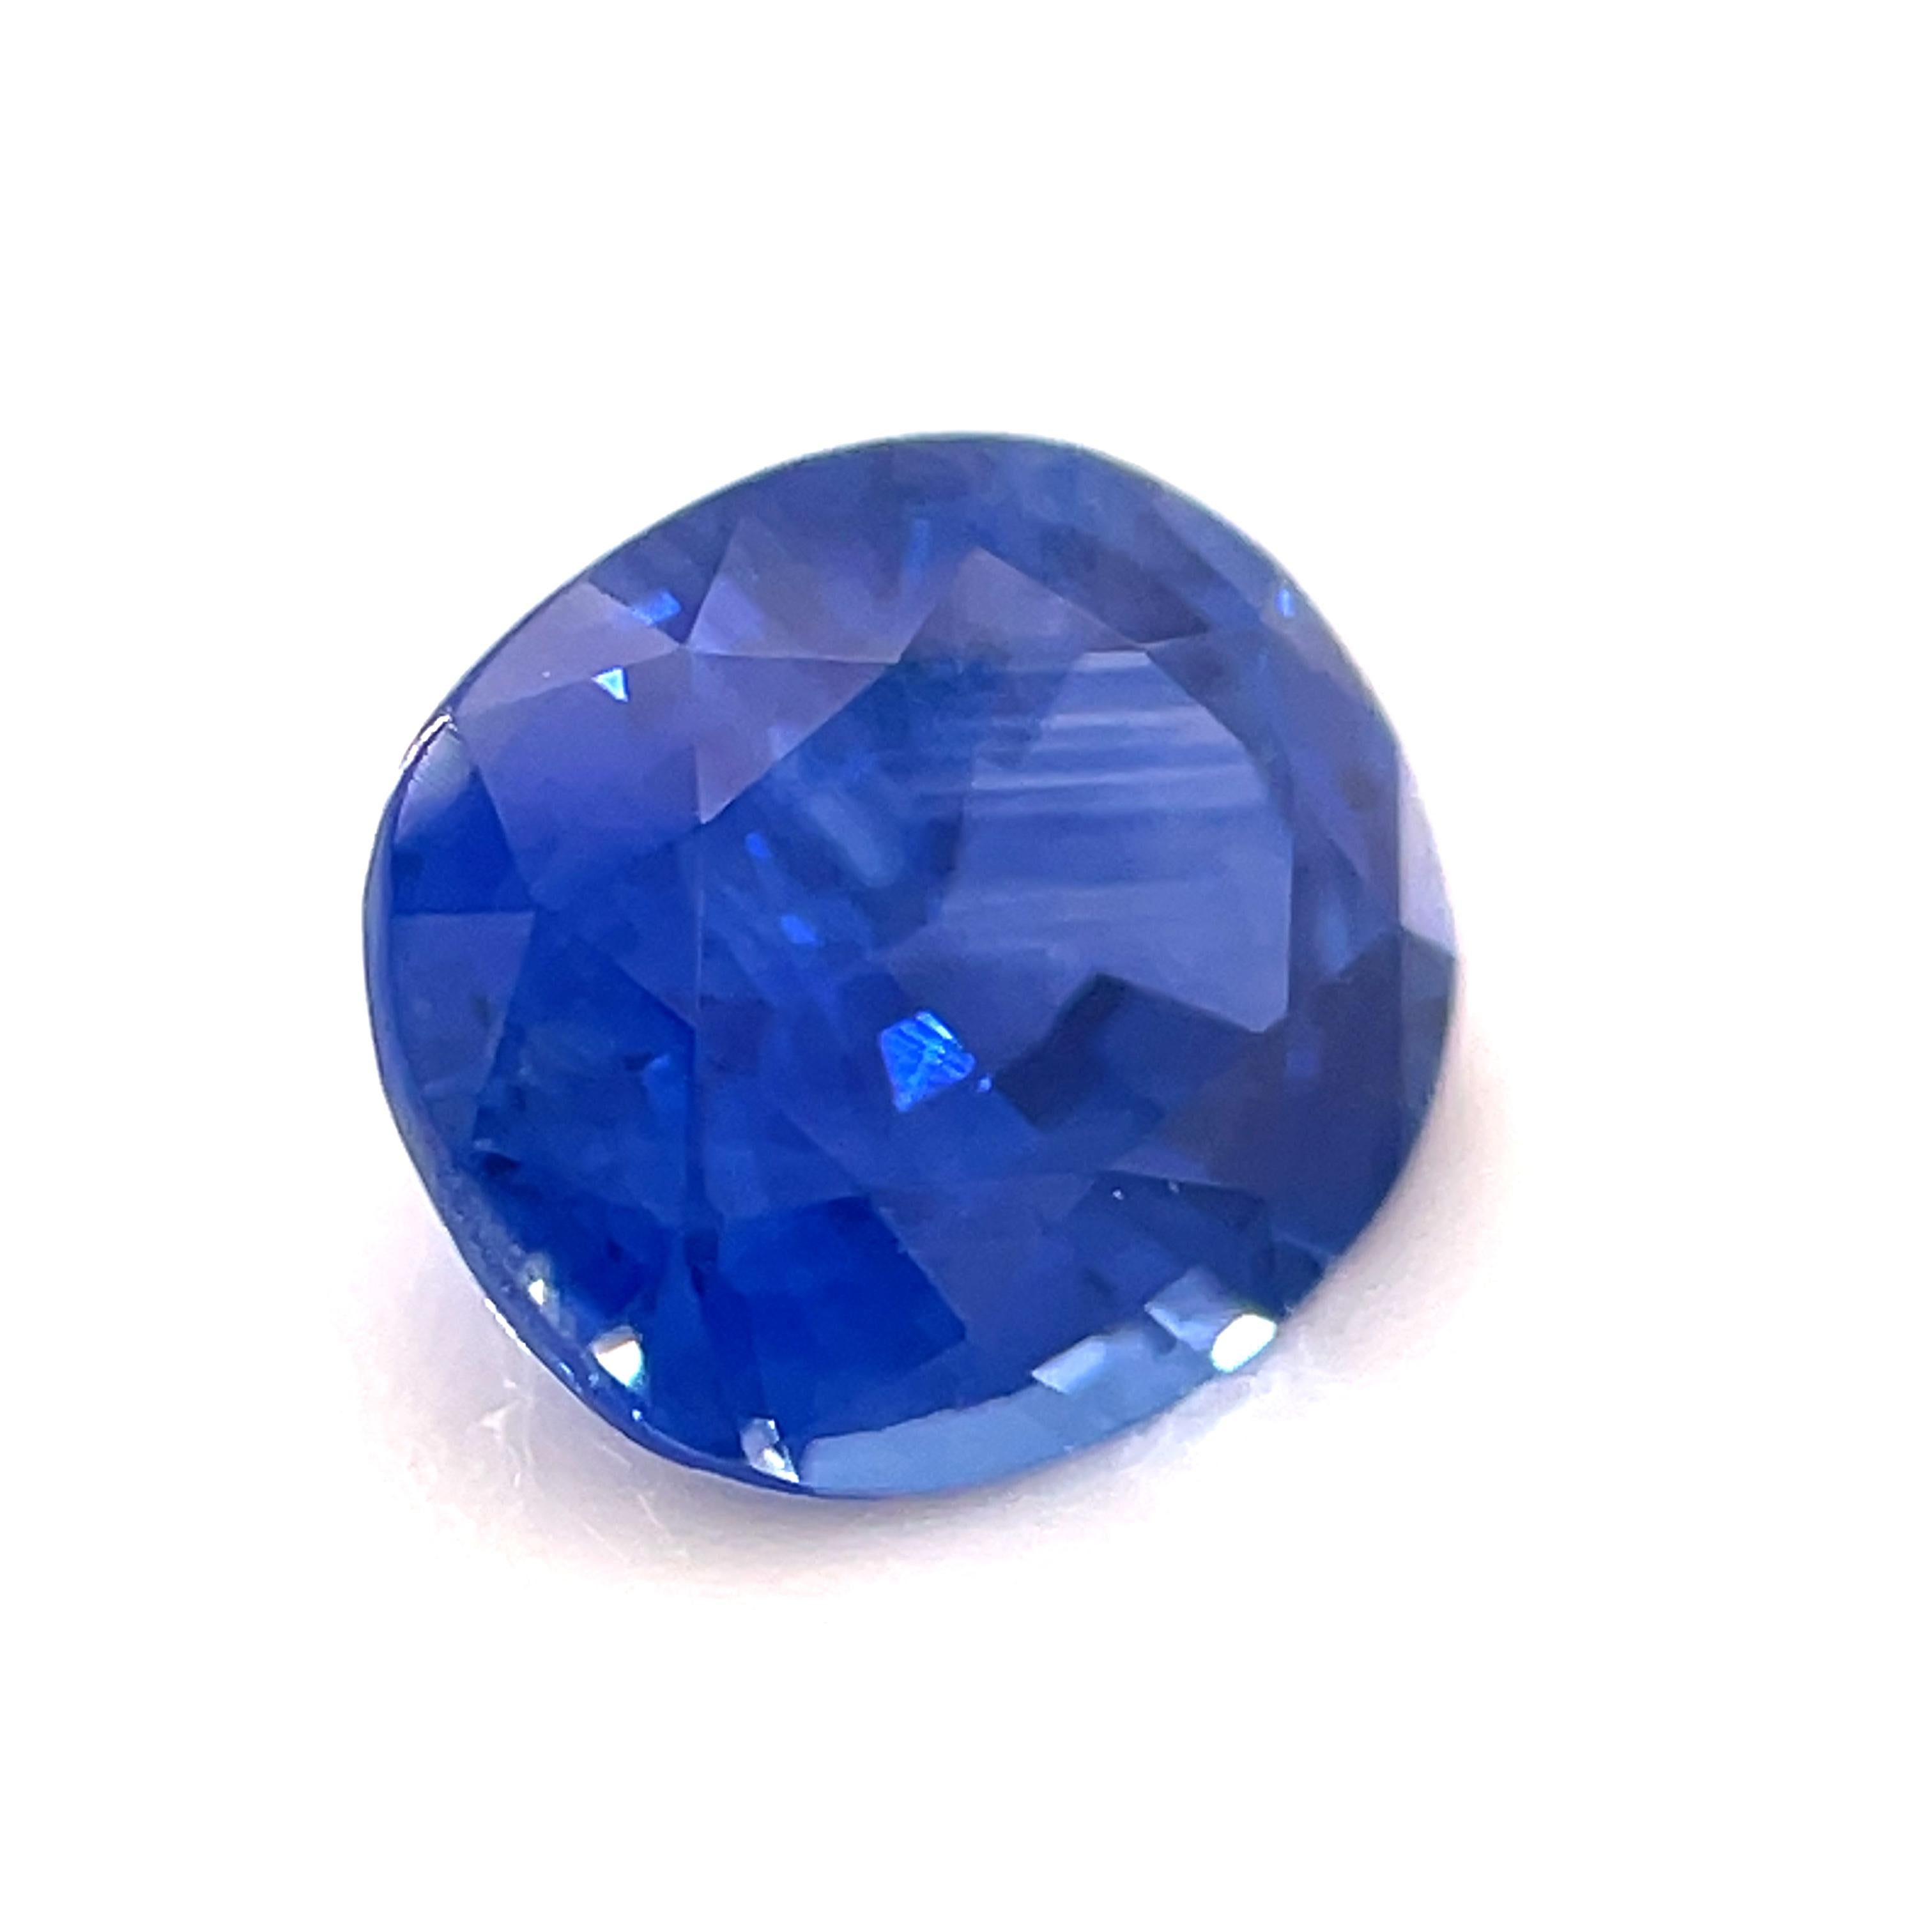 Artisan 1.17 Carat Oval Blue Sapphire Loose Unset 3-Stone Engagement Ring Gemstone For Sale